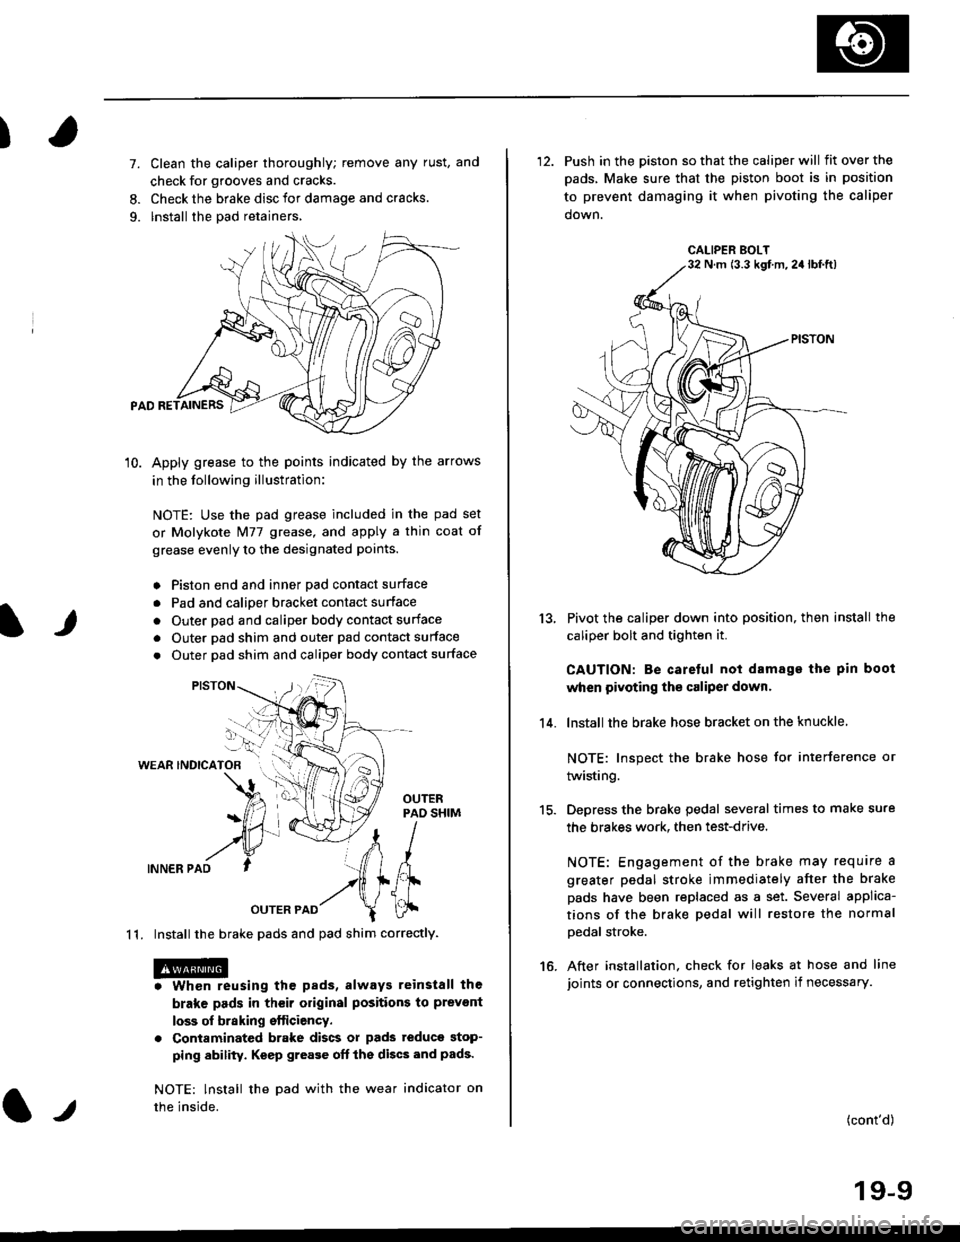 HONDA CIVIC 1997 6.G Workshop Manual )
It
7. Clean the caliper thoroughly; remove any rust, and
check for grooves and cracks.
8. Check the brake disc for damage and cracks.
9. lnstall the pad retainers,
10. Apply grease to the points ind